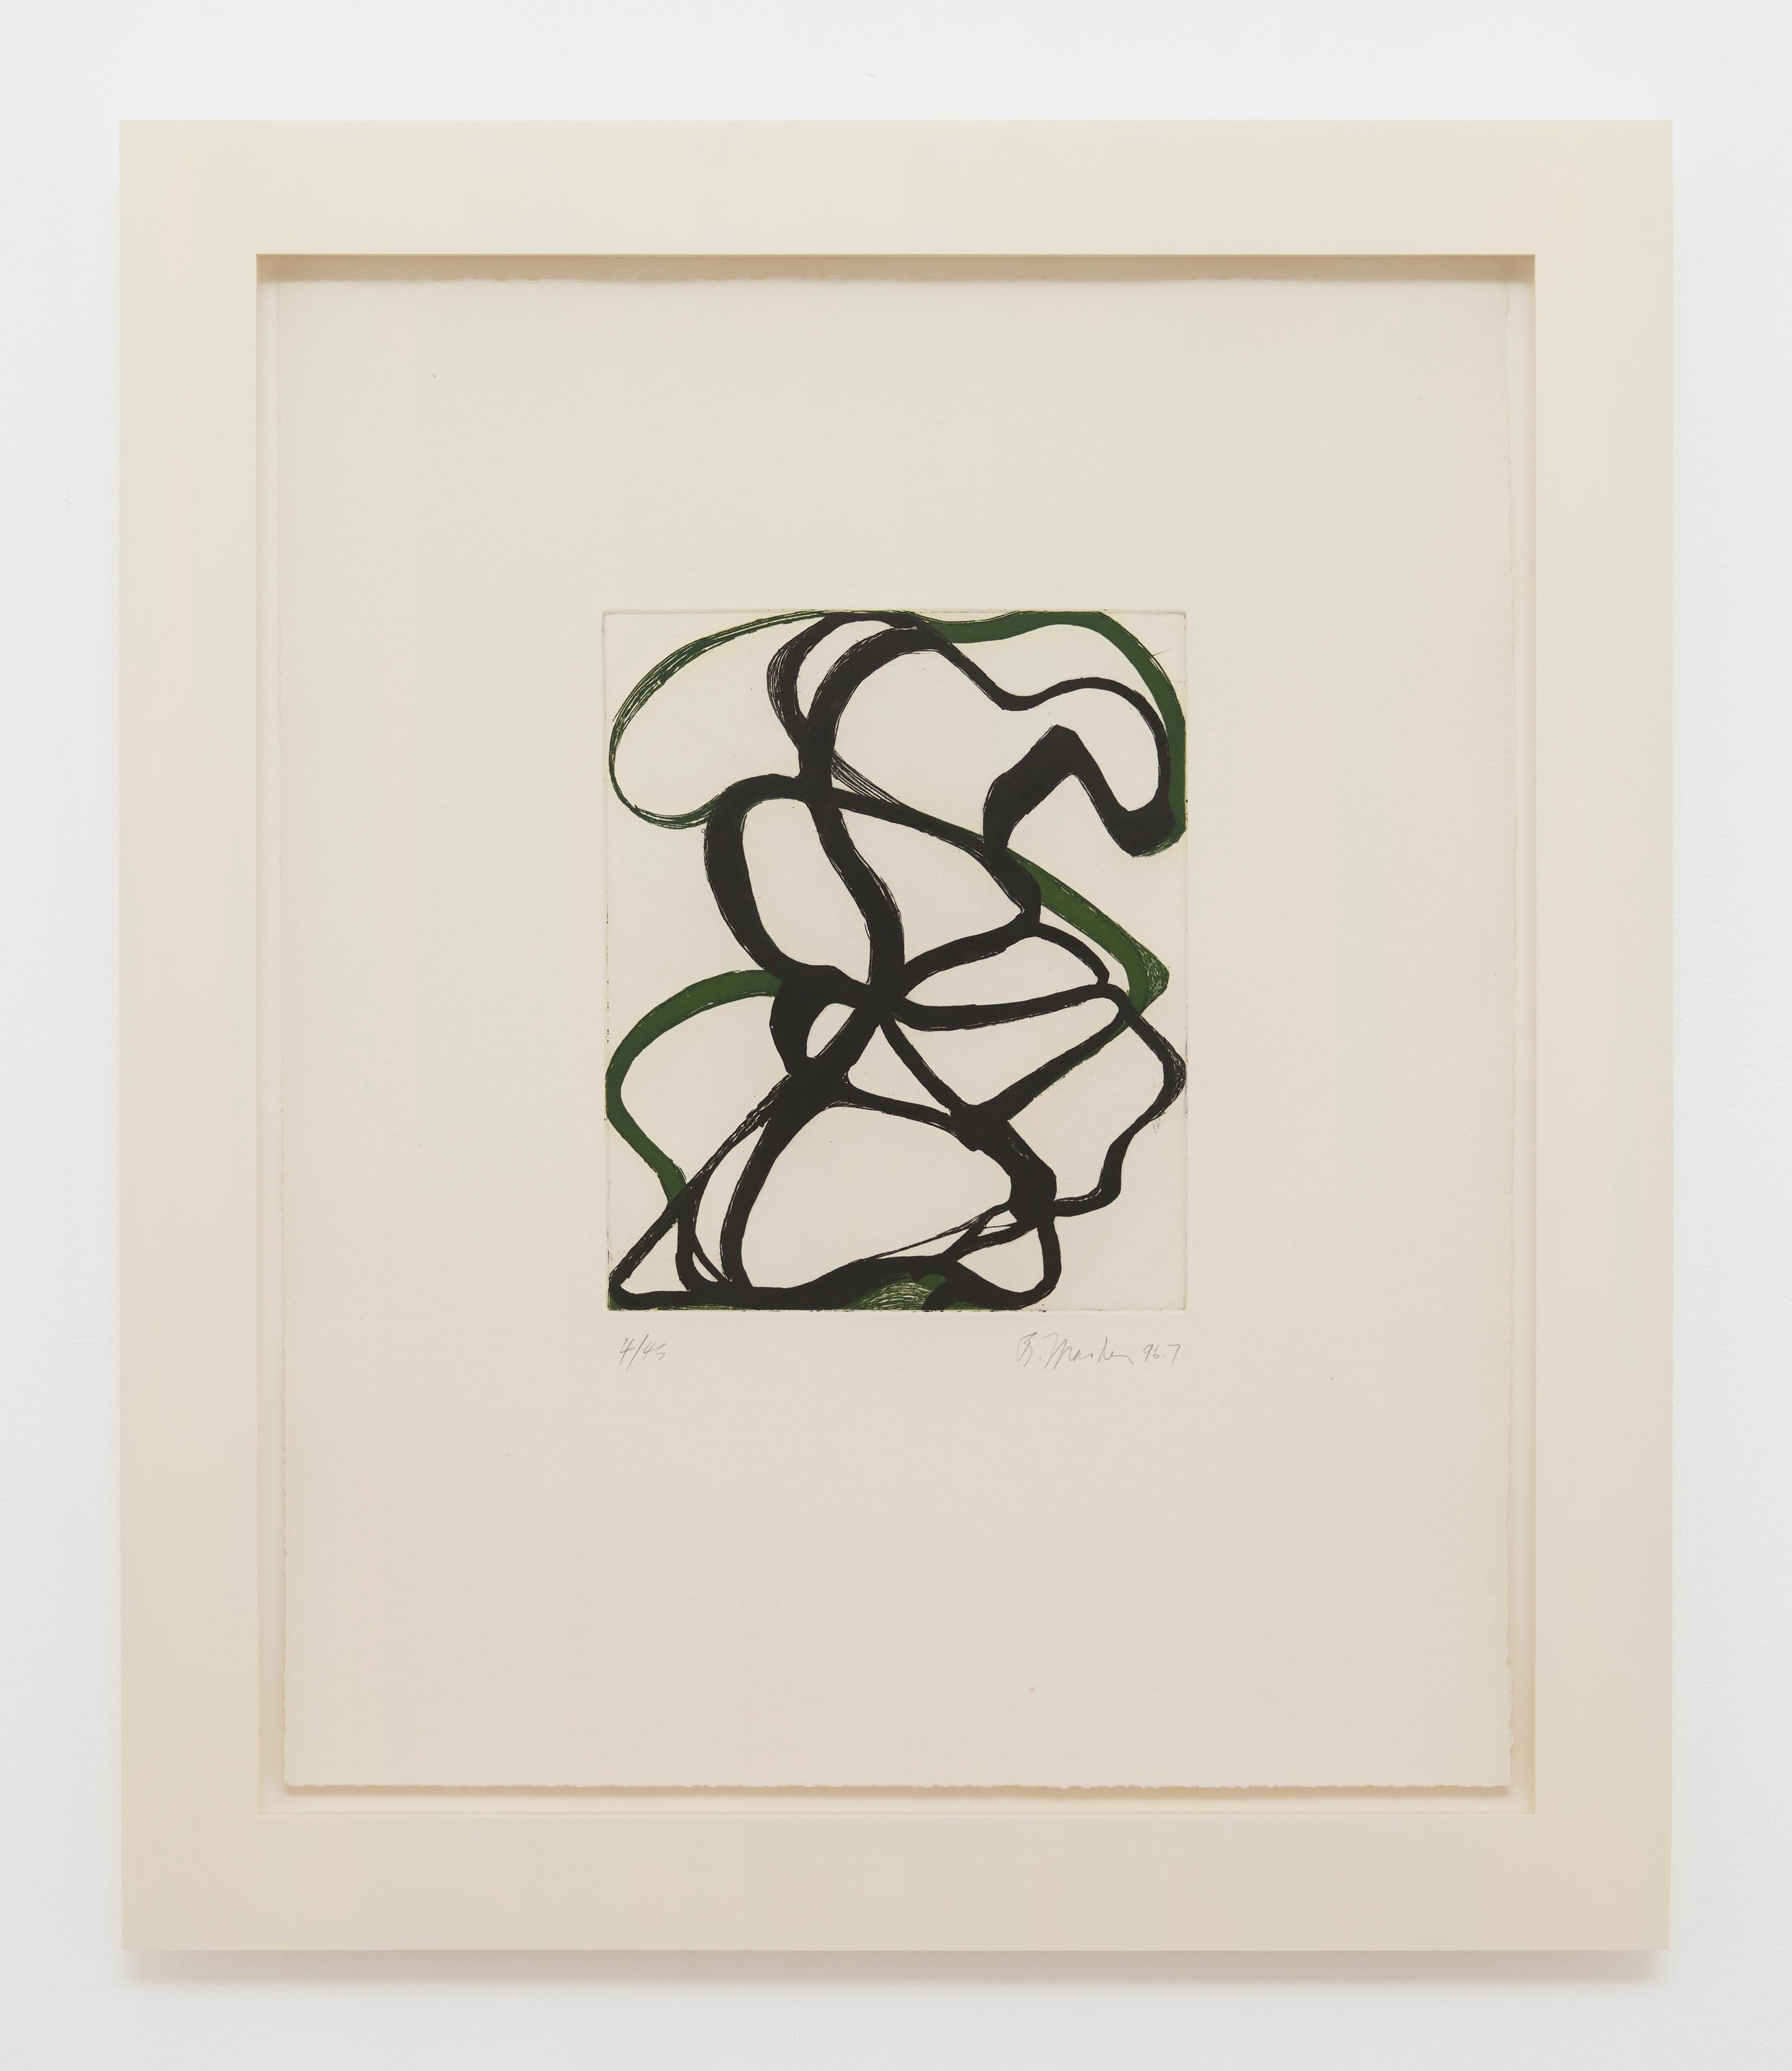 The Fungoid Rock - Print by Brice Marden